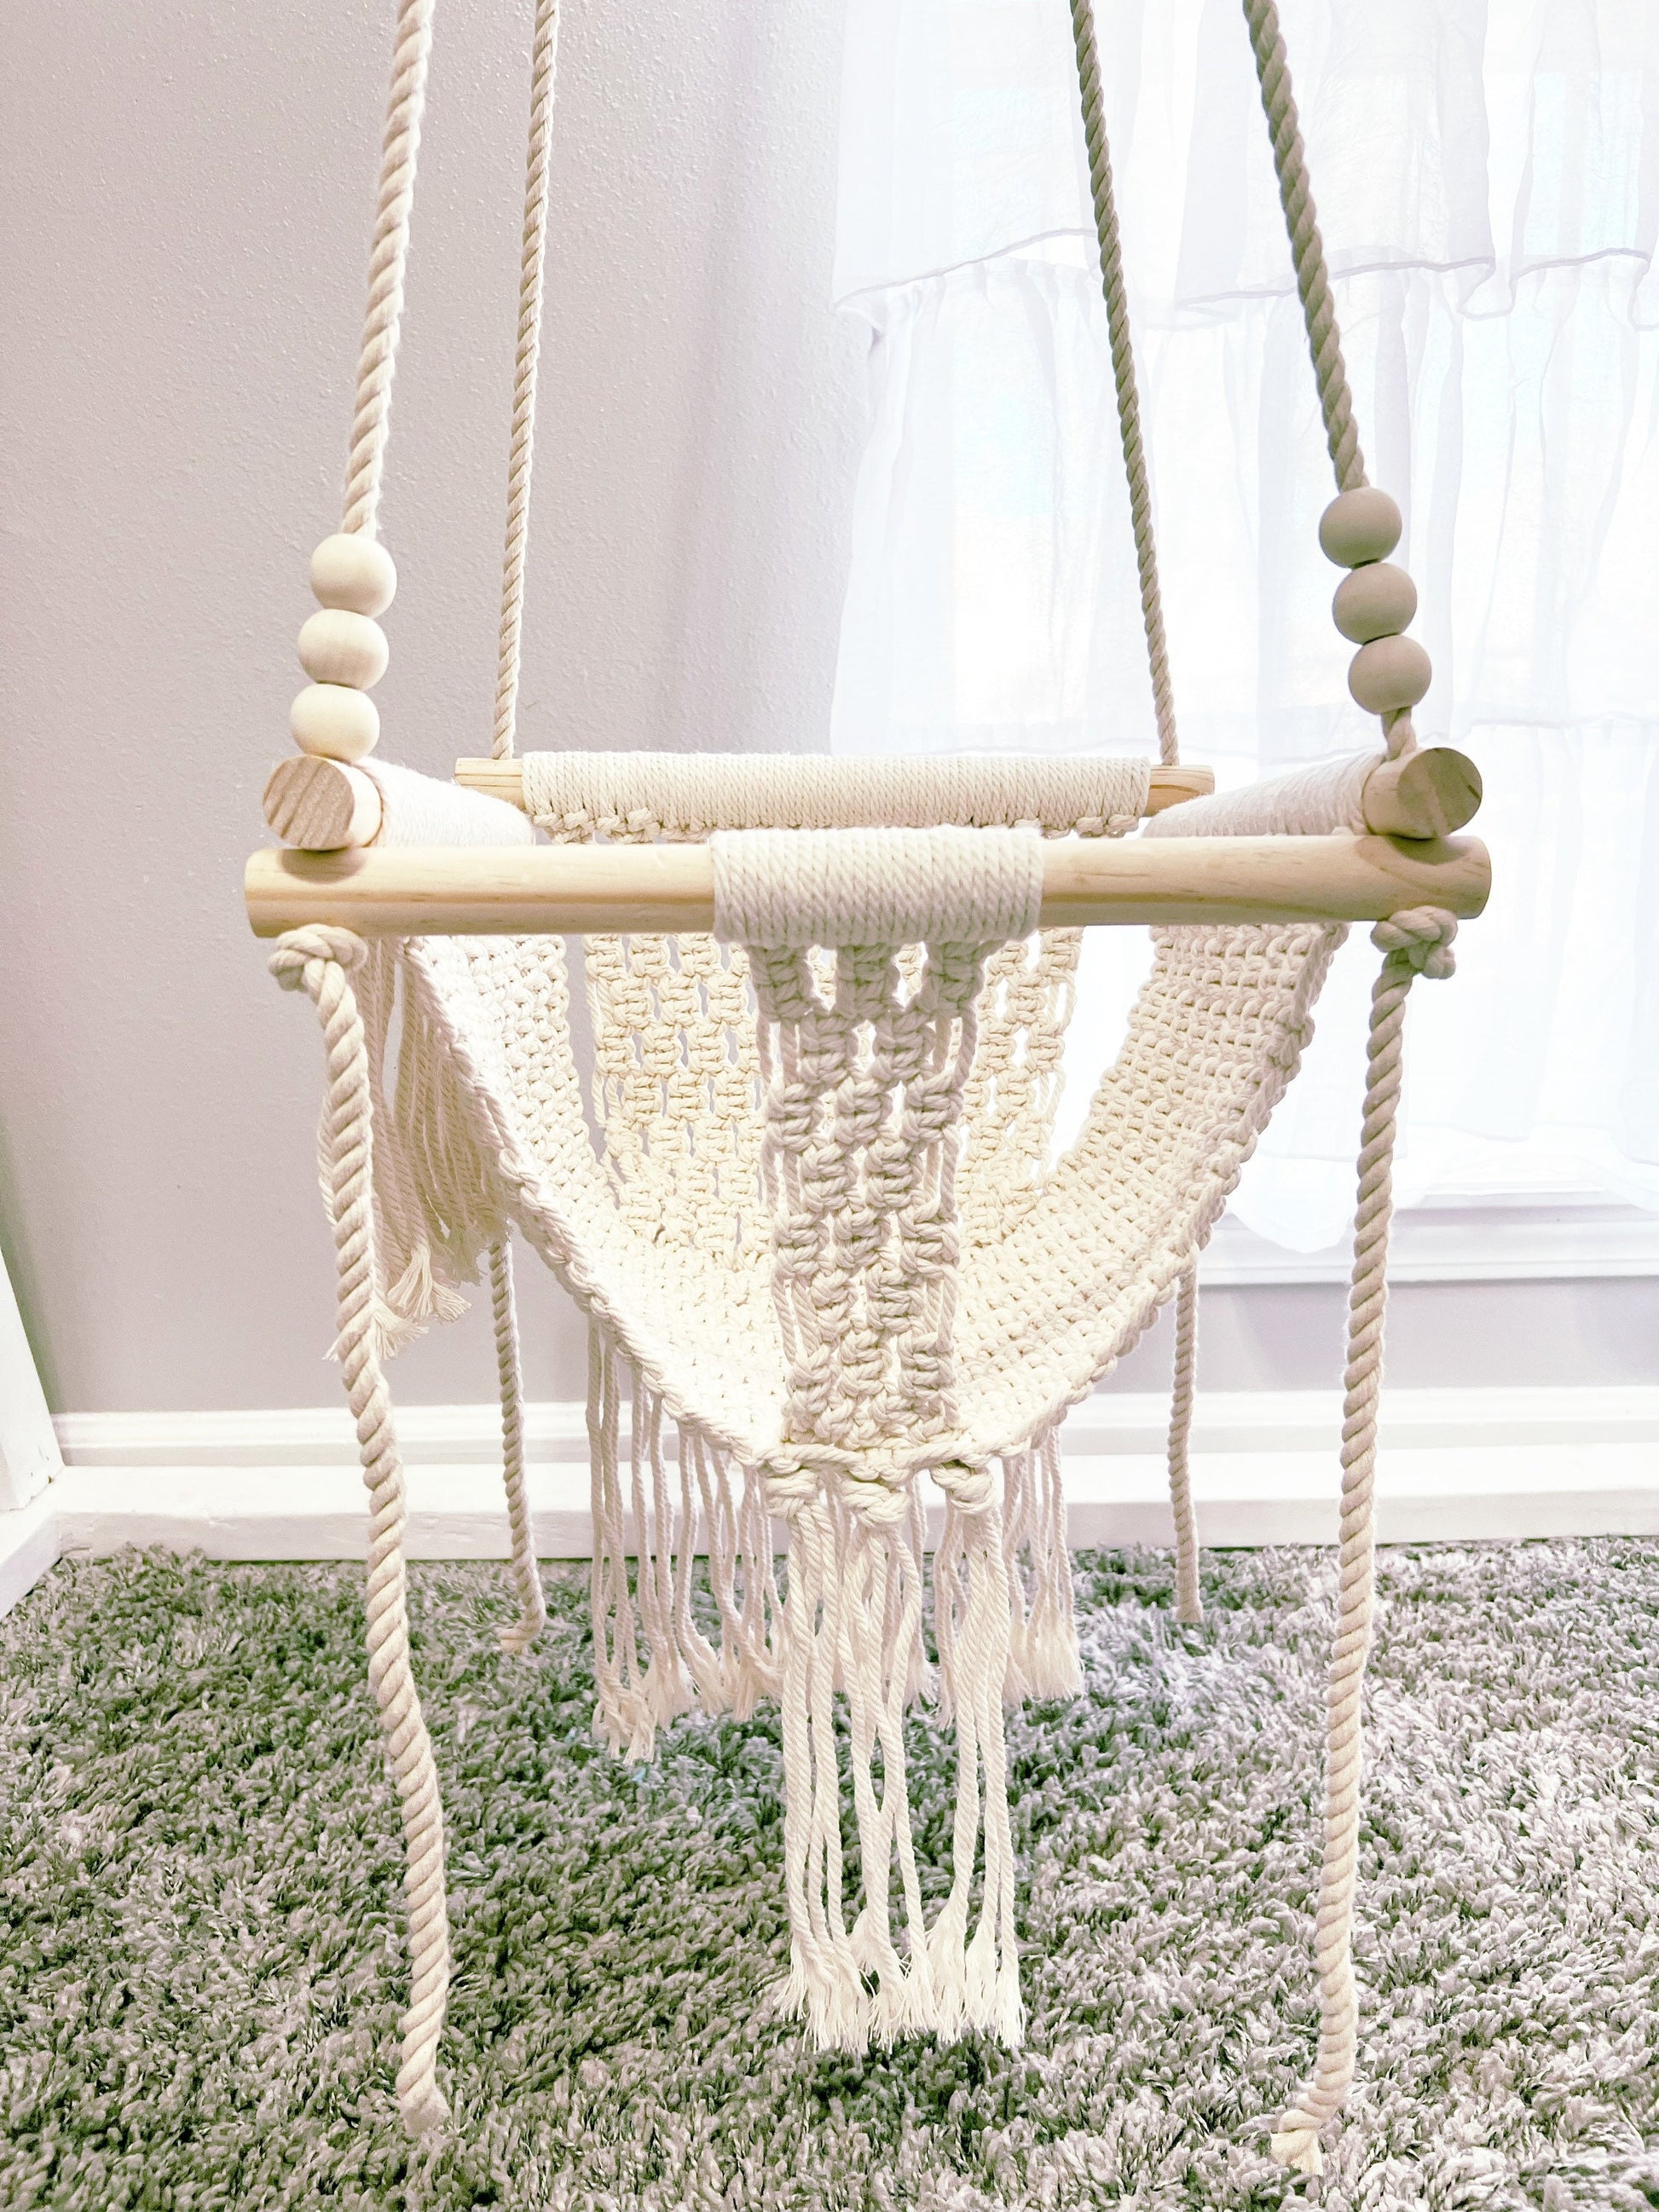 NO STAND AVAILABLE/ Macrame Baby Swing/Swing Only/ Stand is not included/